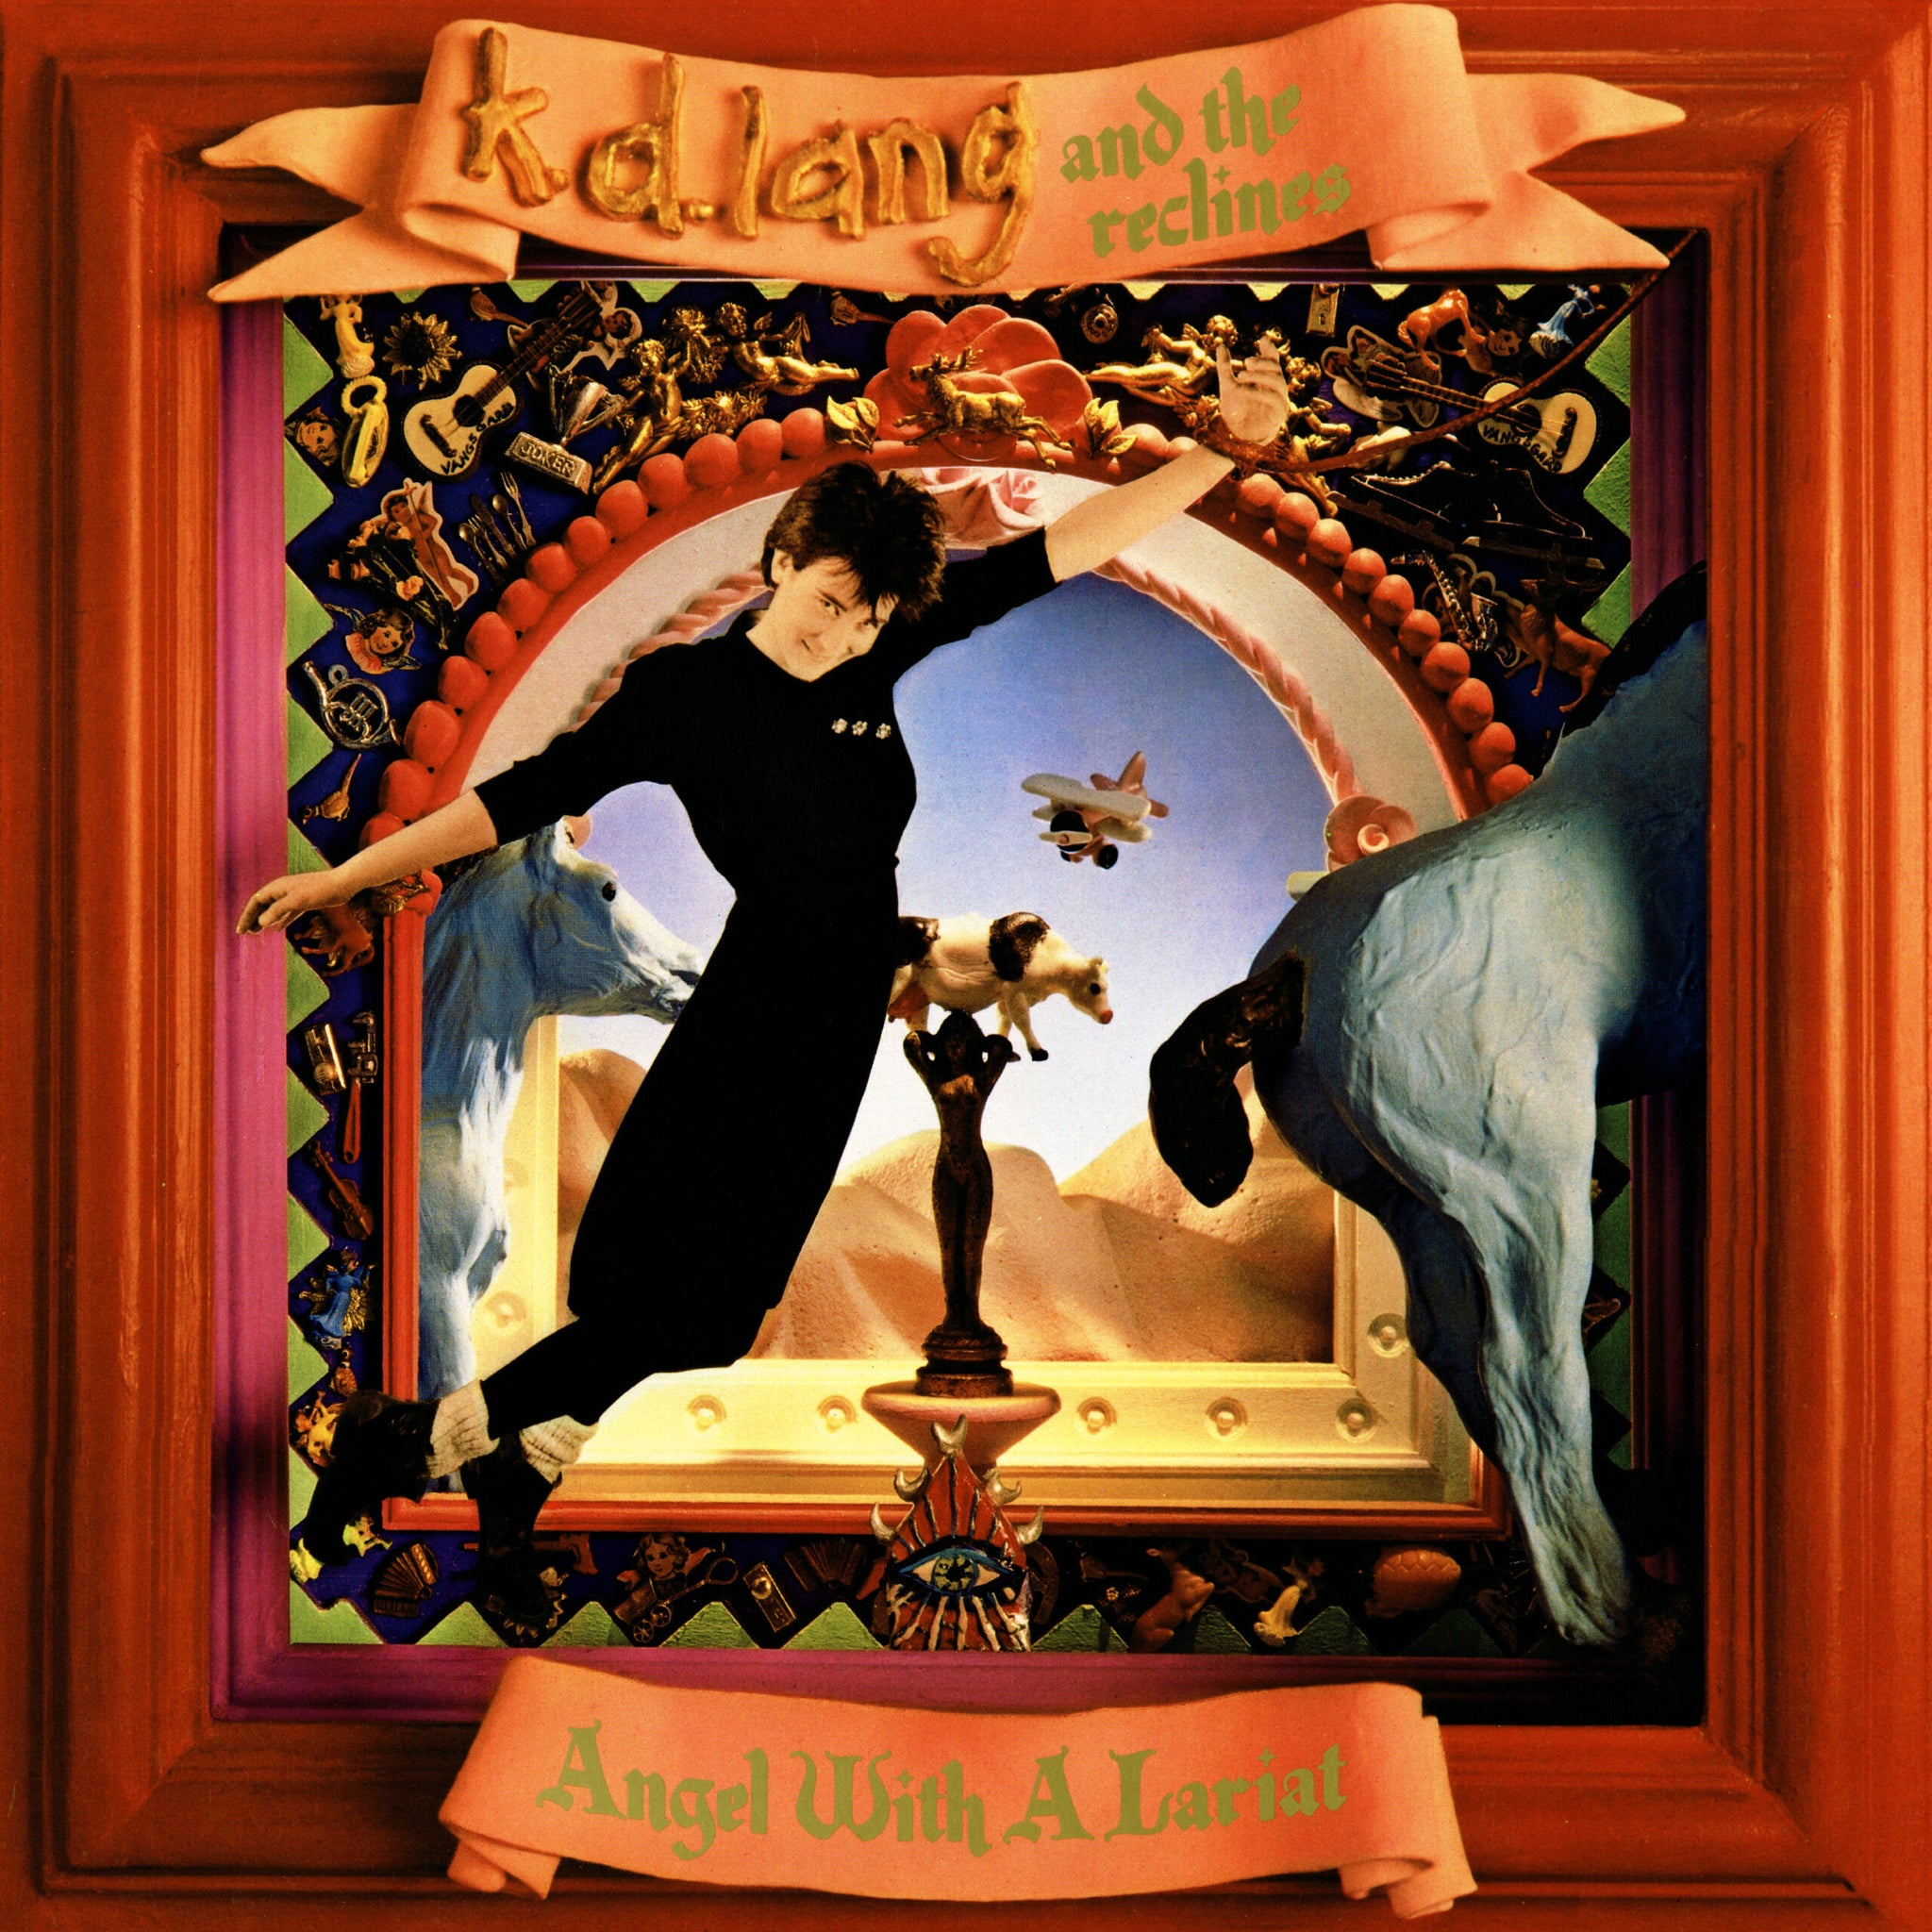 KD LANG AND THE RECLINES - Angel with A Lariat - LP Limited Red Vinyl [RSD2020-AUG29]